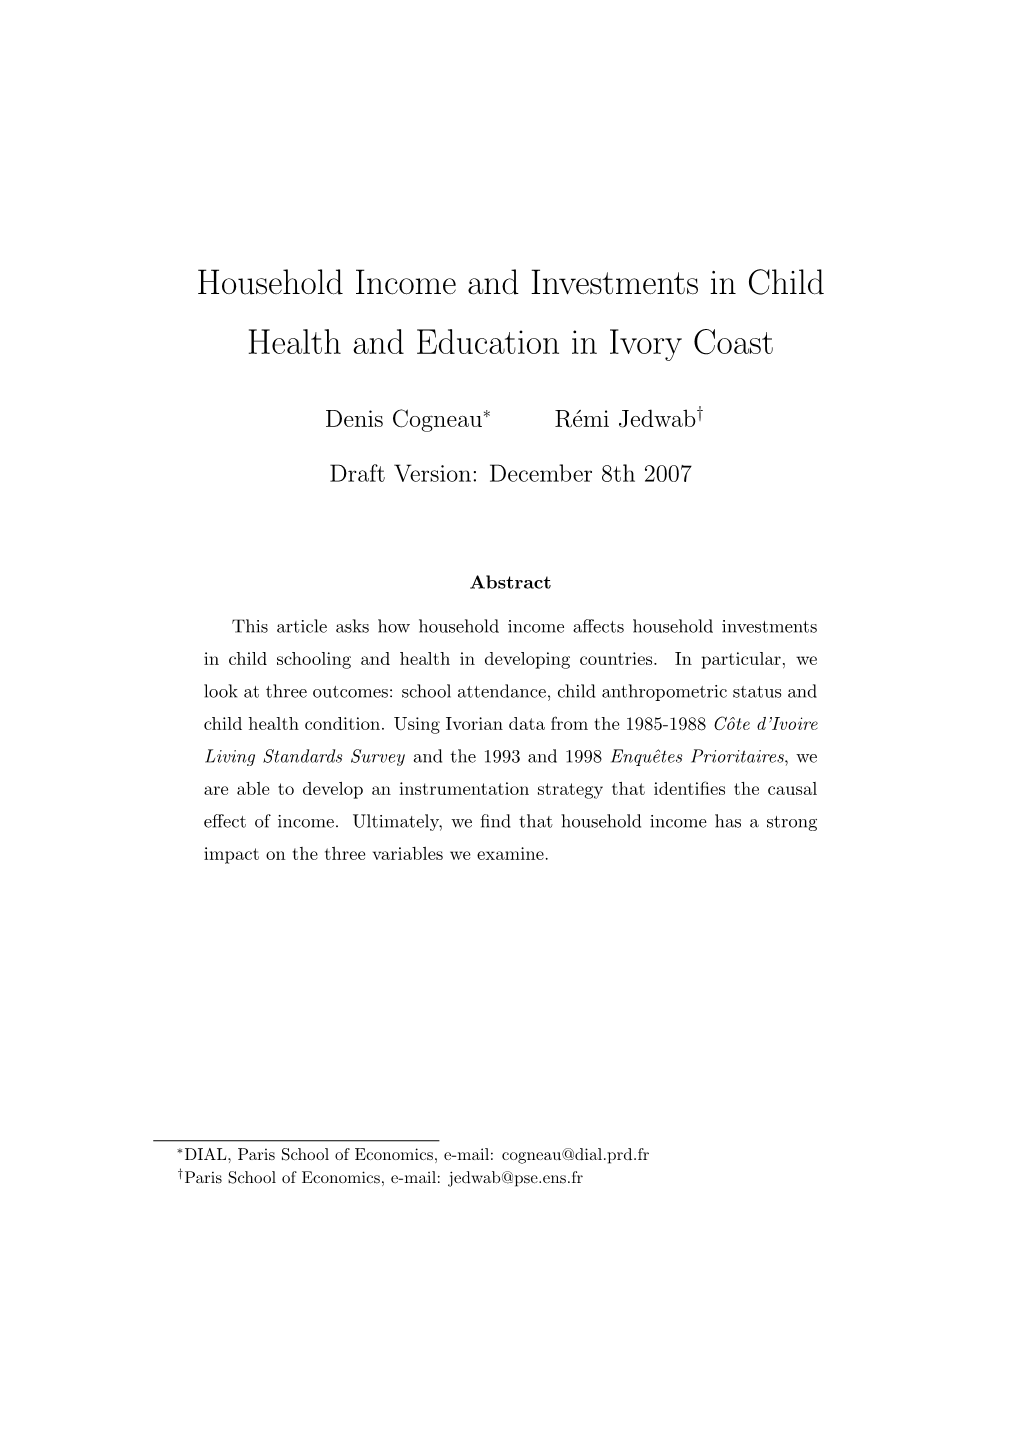 Household Income and Investments in Child Health and Education in Ivory Coast